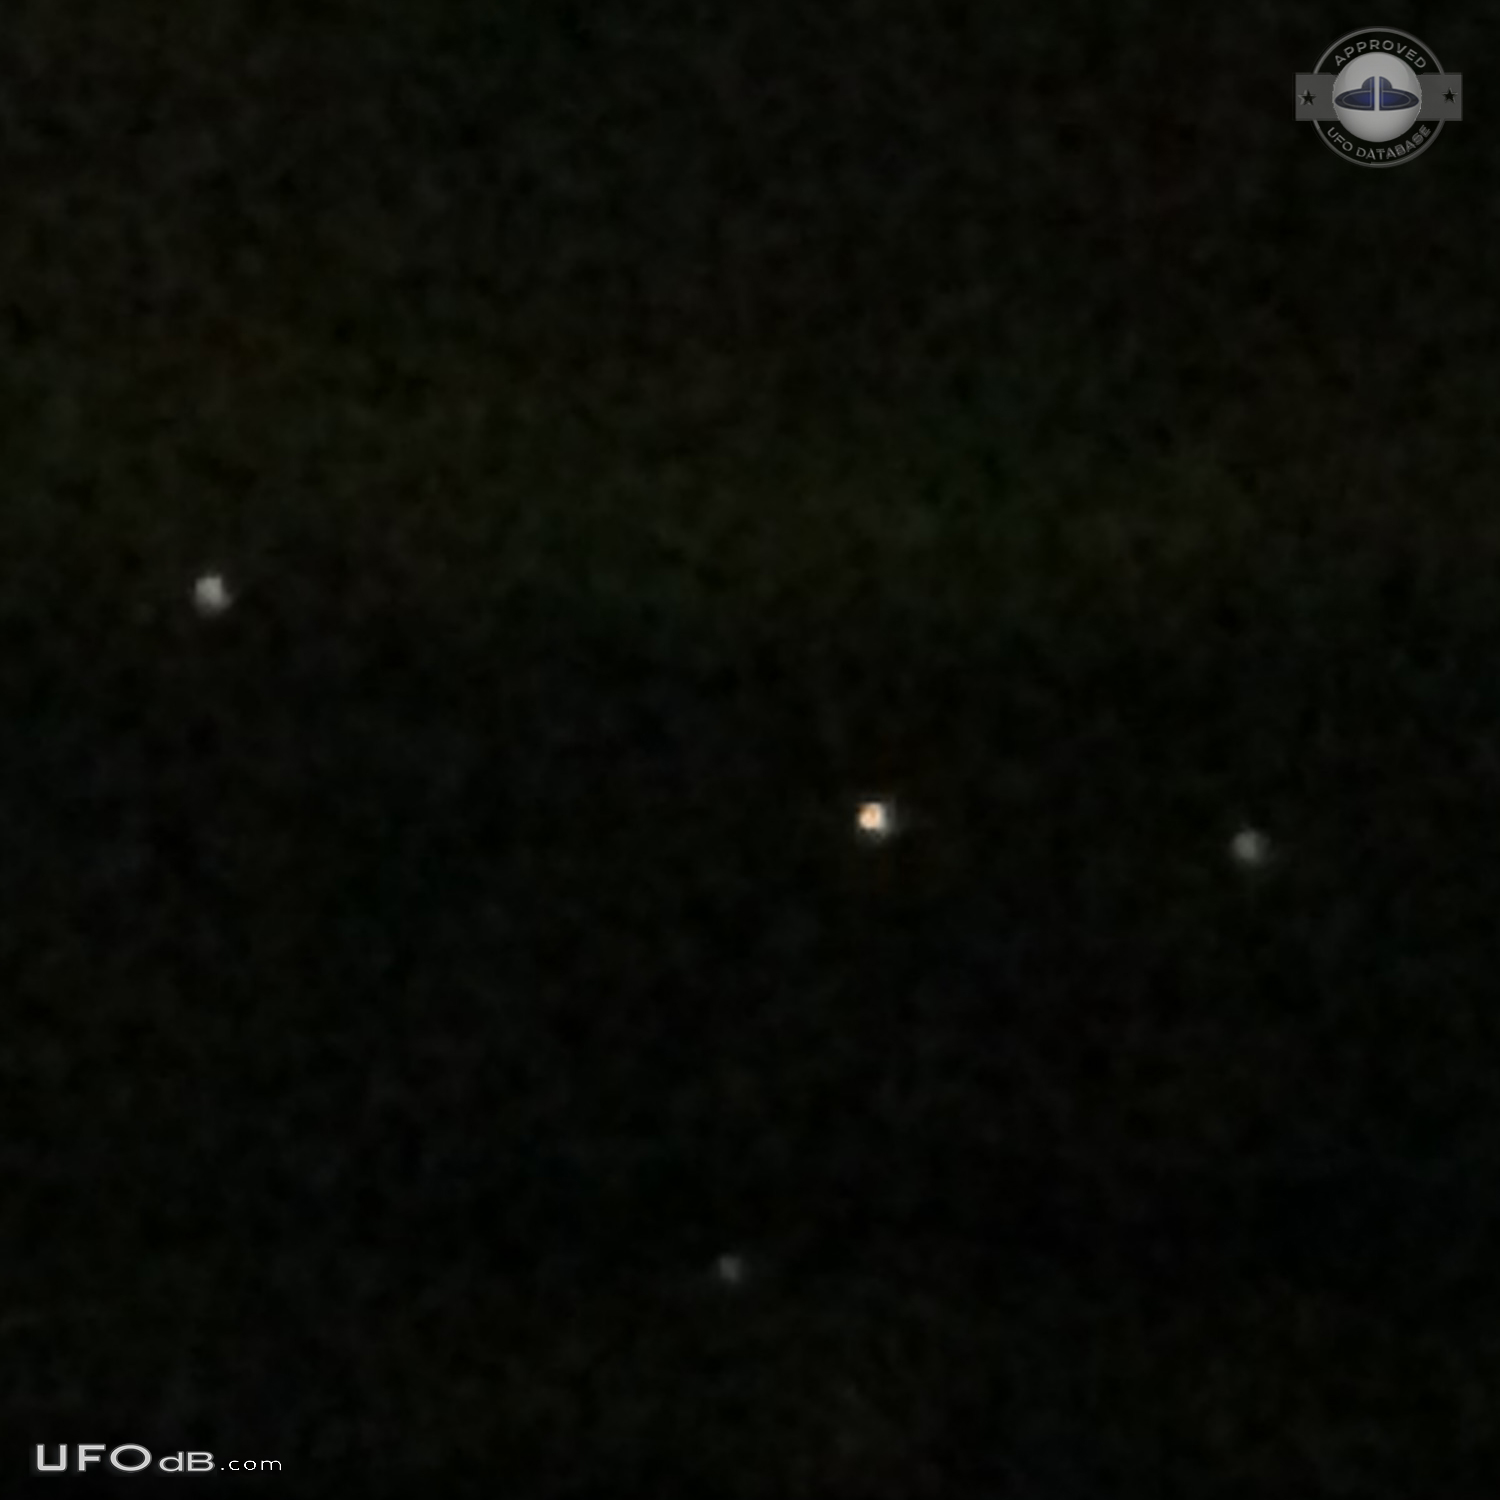 Yellowish-white UFOs with hints of red at center hovered - Clinton Was UFO Picture #755-5